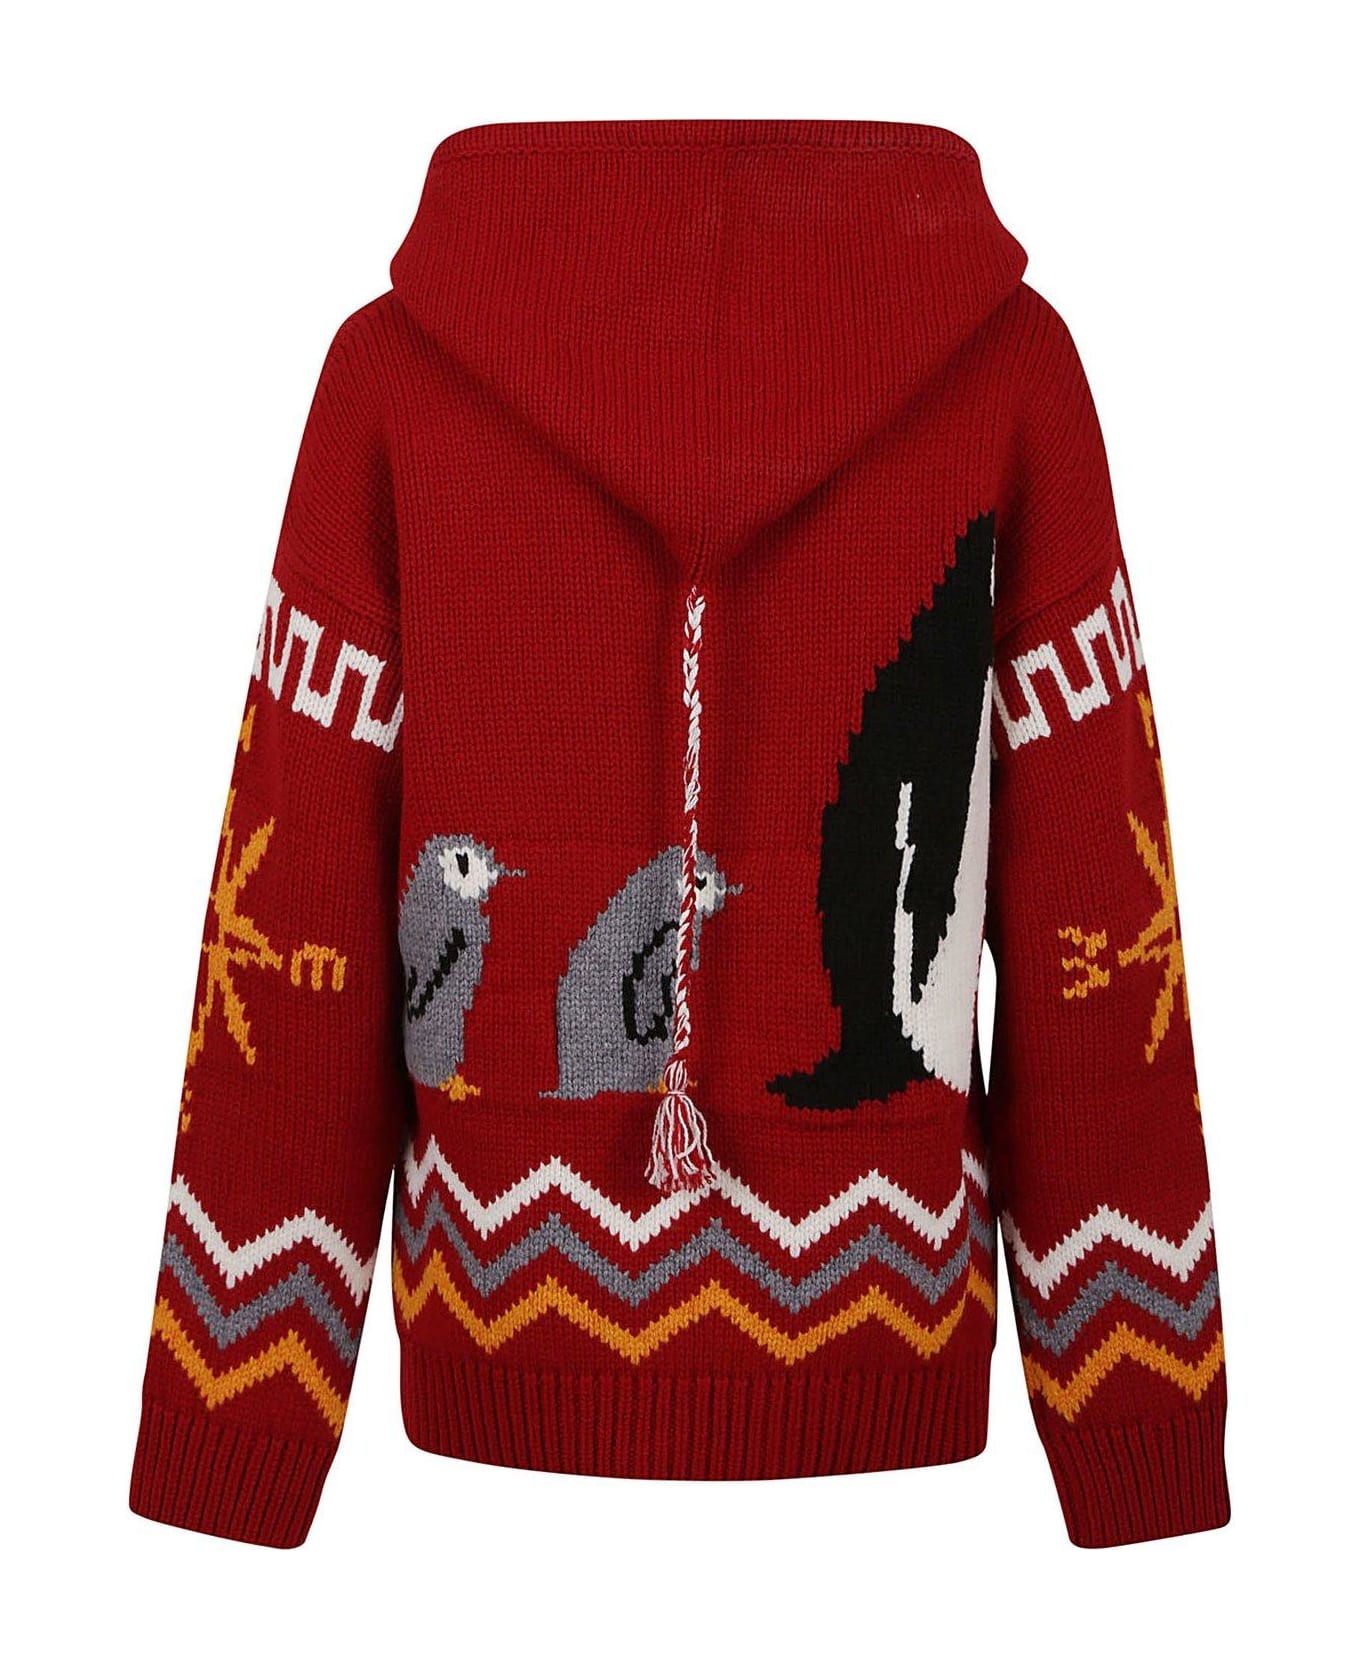 Alanui For The Love Of Pengui Drawstring Hoodie - FIRE